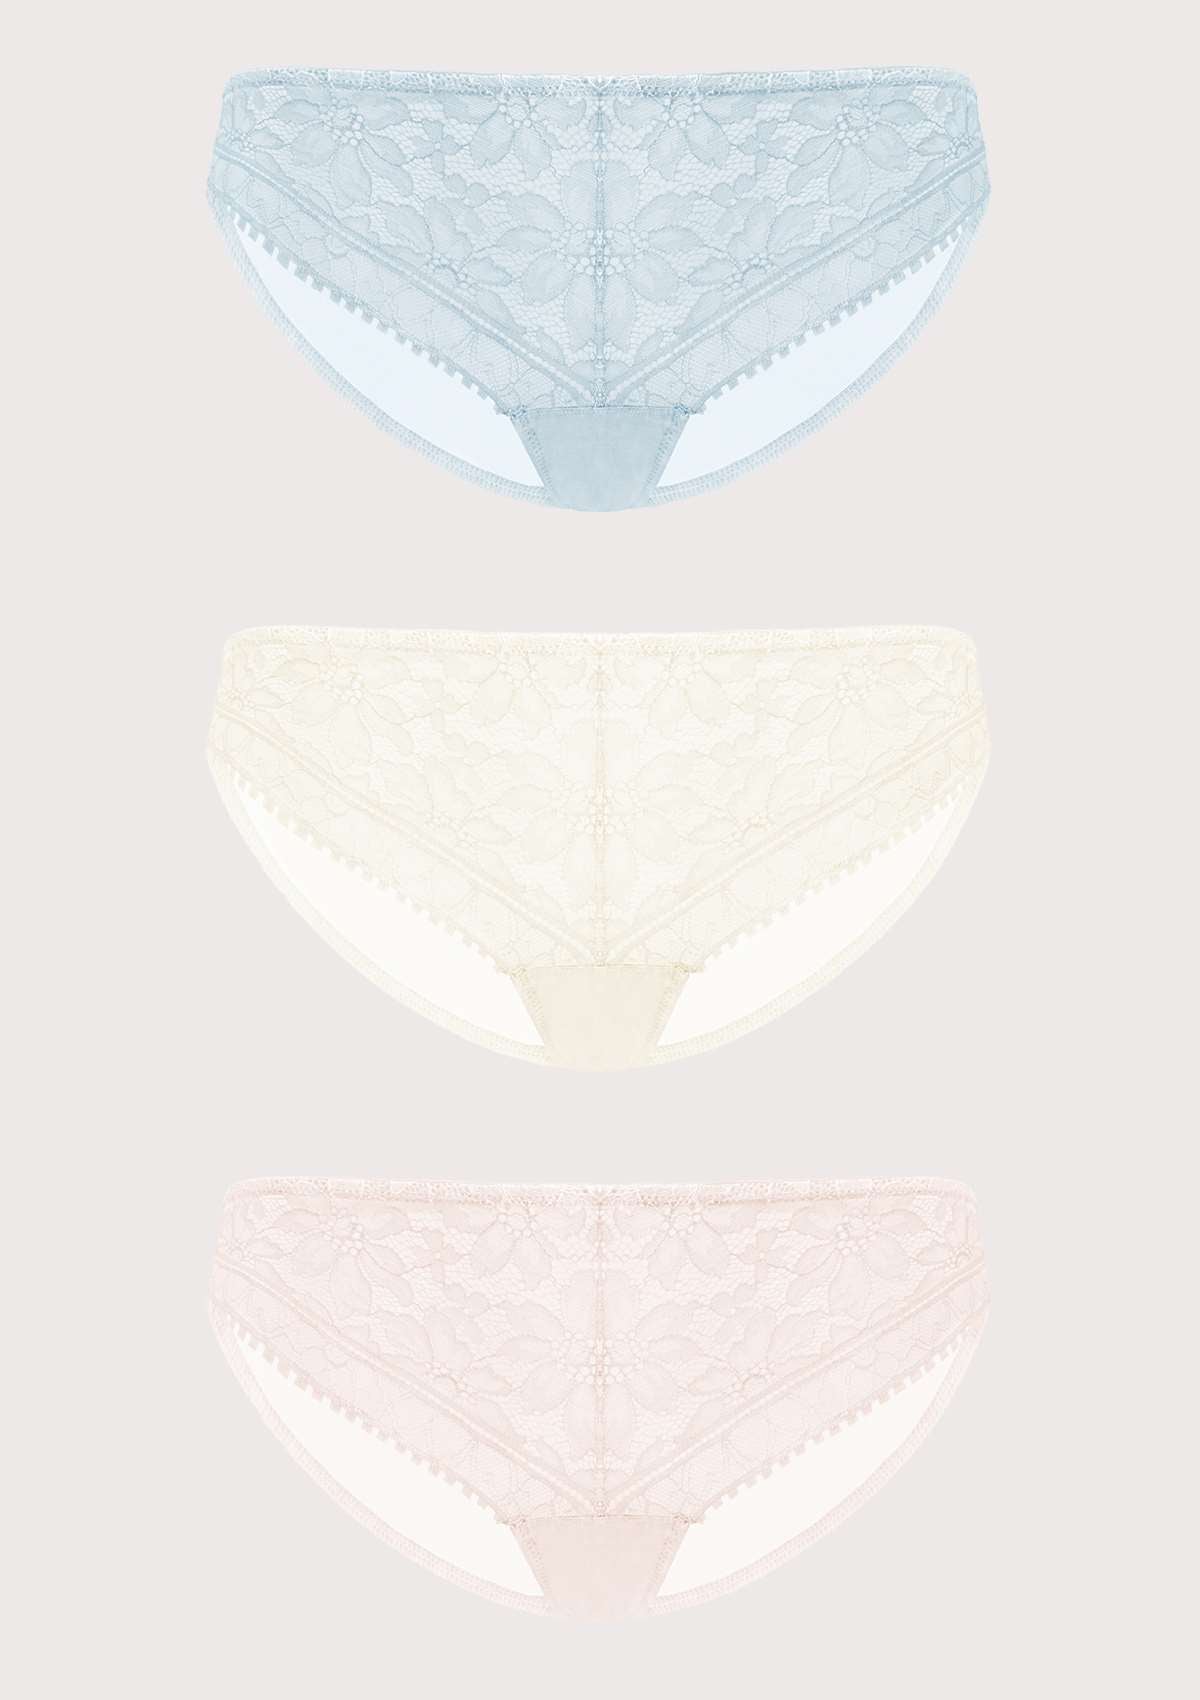 HSIA Silene Sheer Lace Mesh Hipster Underwear 3 Pack - M / Light Blue+Champagne+Light Pink